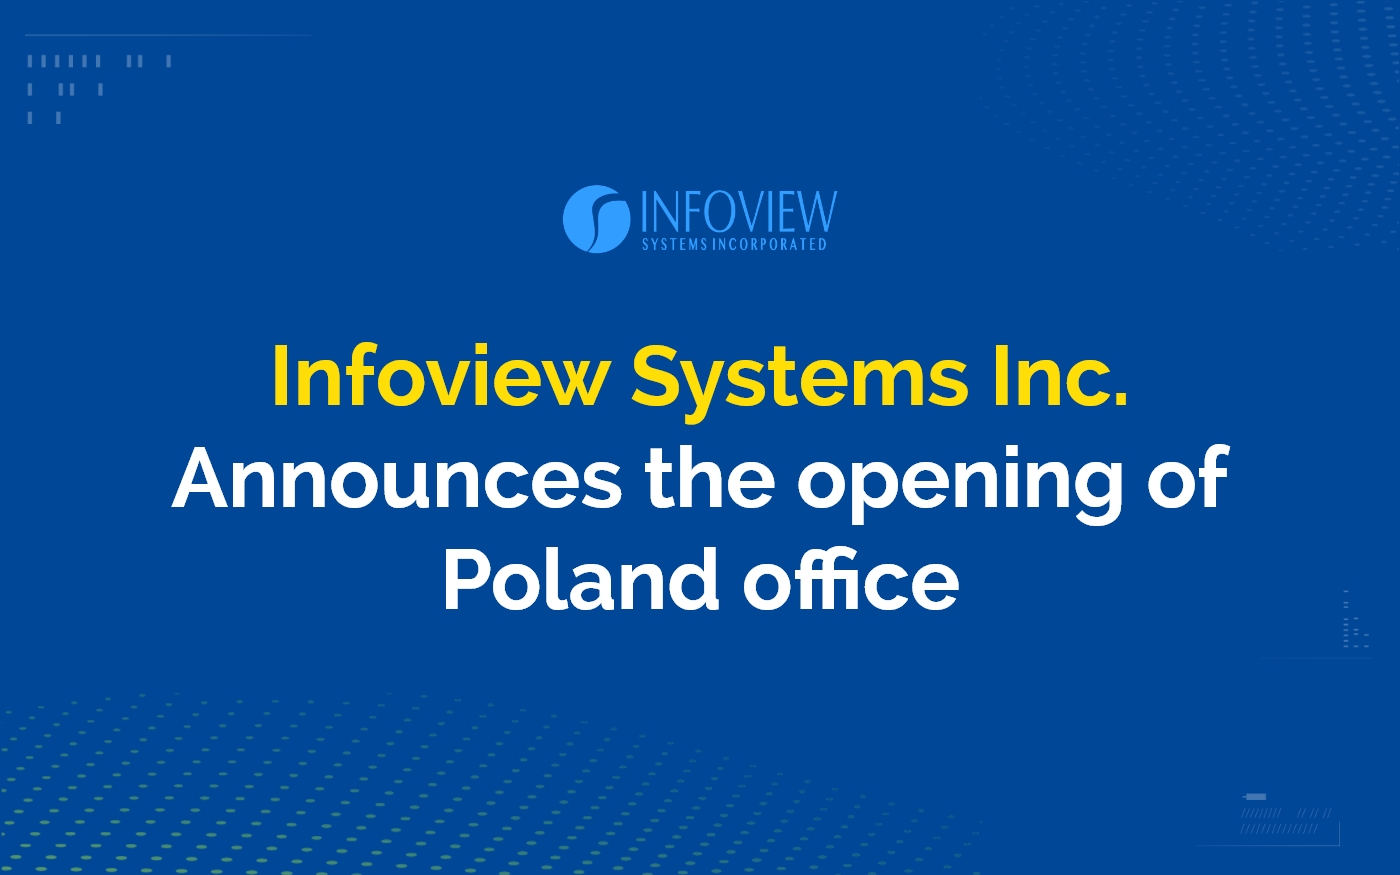 Infoview systems announces the opening of Poland office